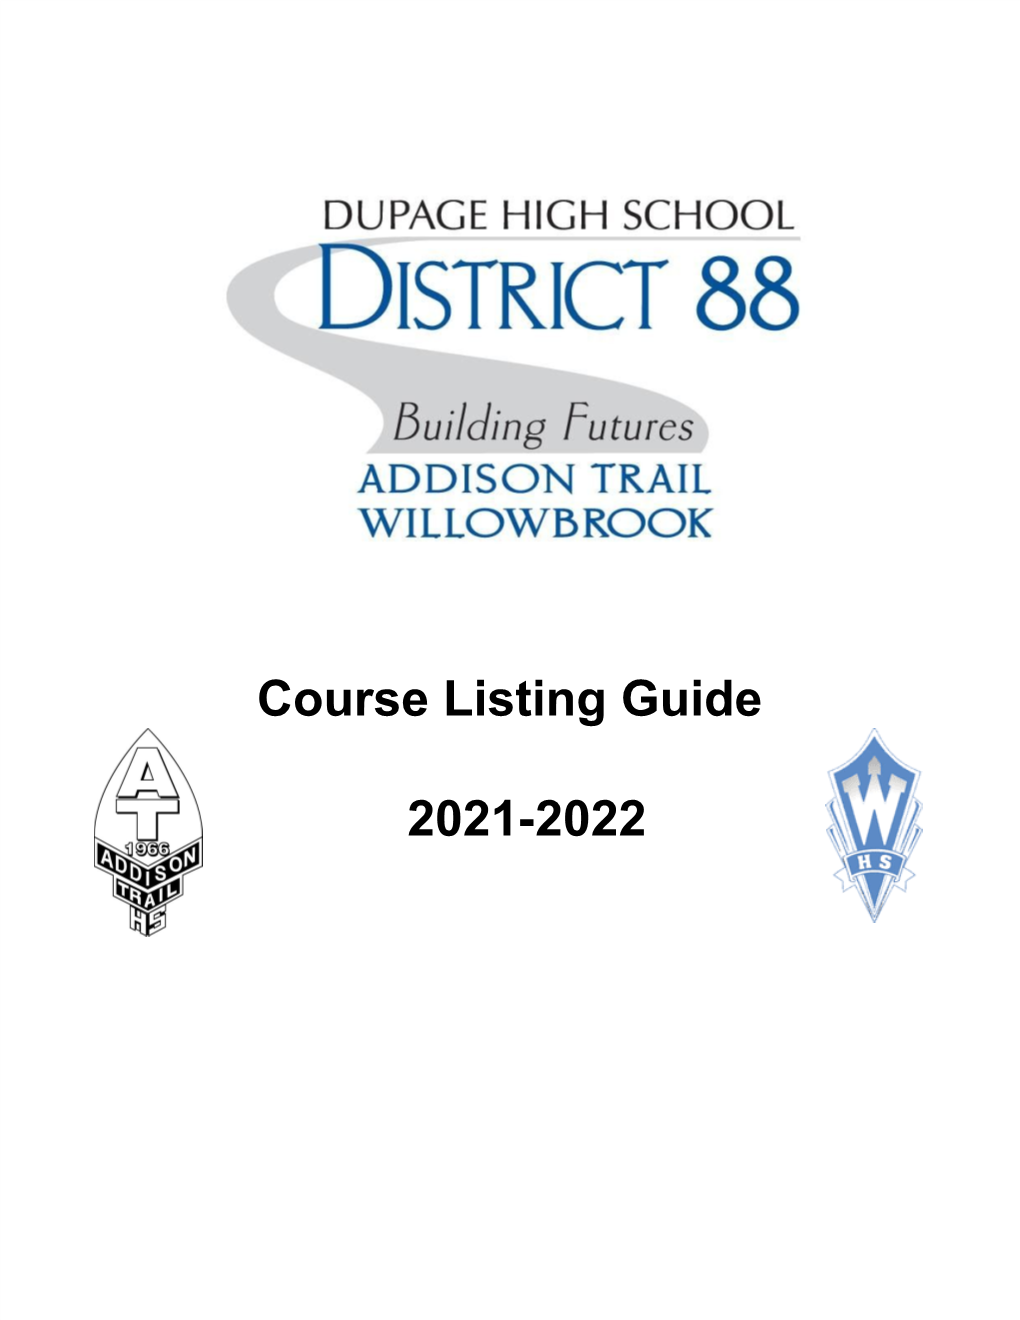 Course Listing Guide 2021-2022